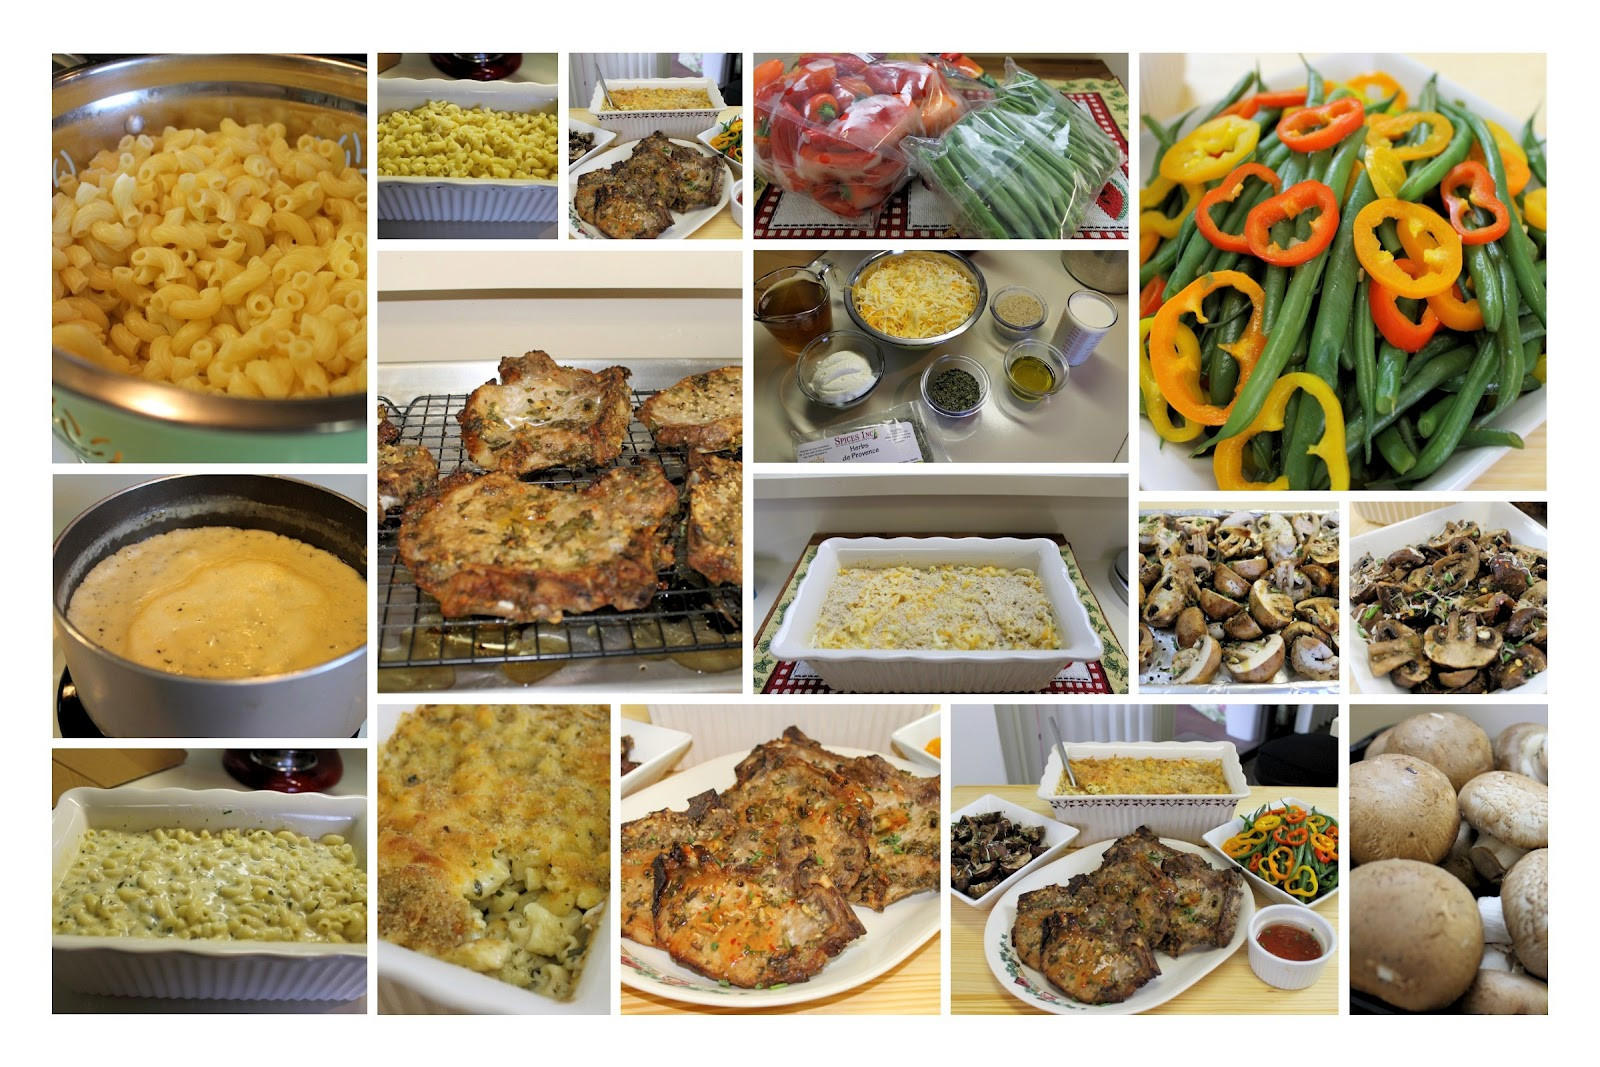 Soul Food Sunday Dinner Ideas
 CW s Cafe Today From Pantry To Table Sunday Dinner